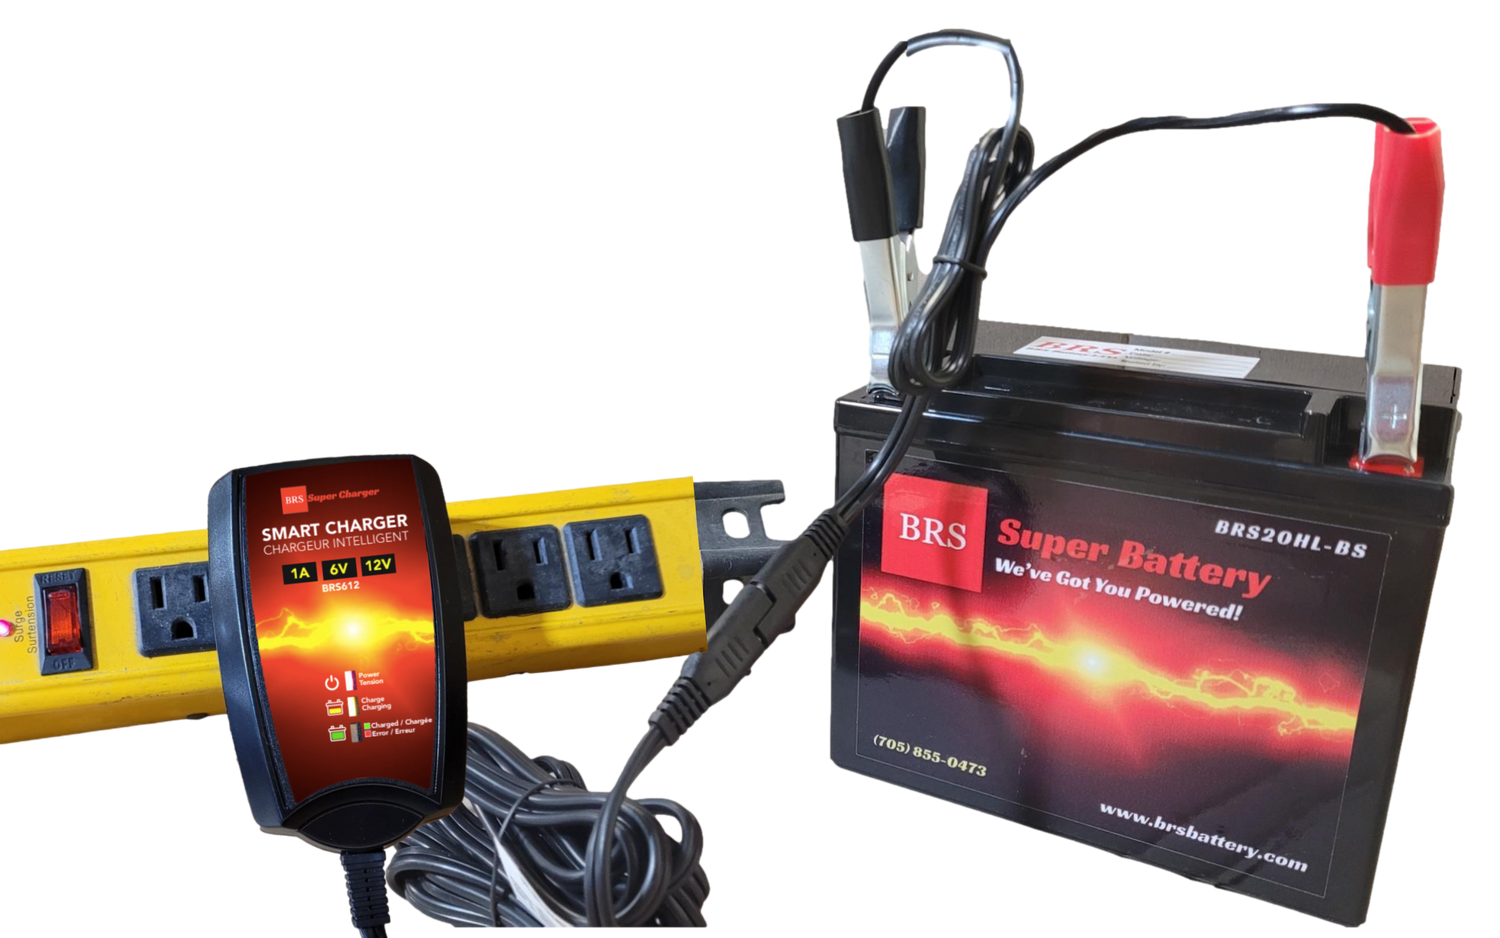 High Performance BRS9-BS 10 Year Battery & Smart Charger / Maintainer Combo Bundle Kit 12v Sealed AGM PowerSports Battery - BRS Super Battery